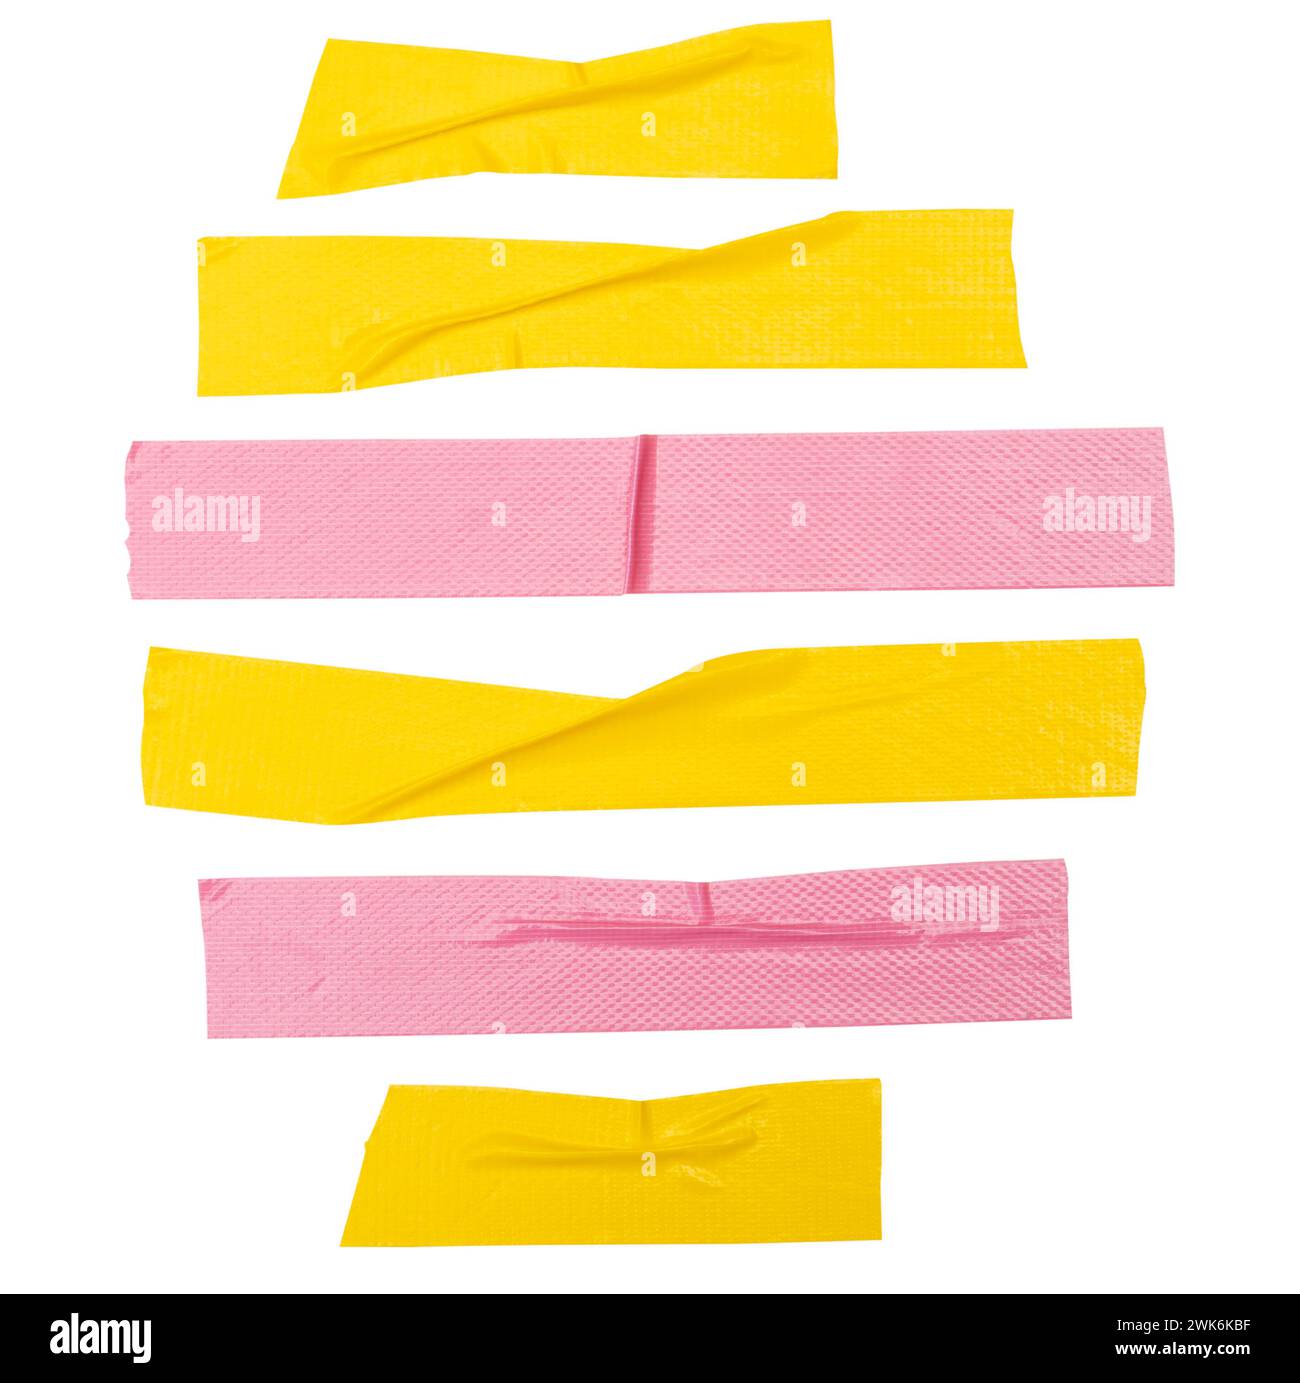 Top view set of wrinkled yellow and pink adhesive vinyl tape or cloth tape in stripes shape is isolated on white background with clipping path. Stock Photo